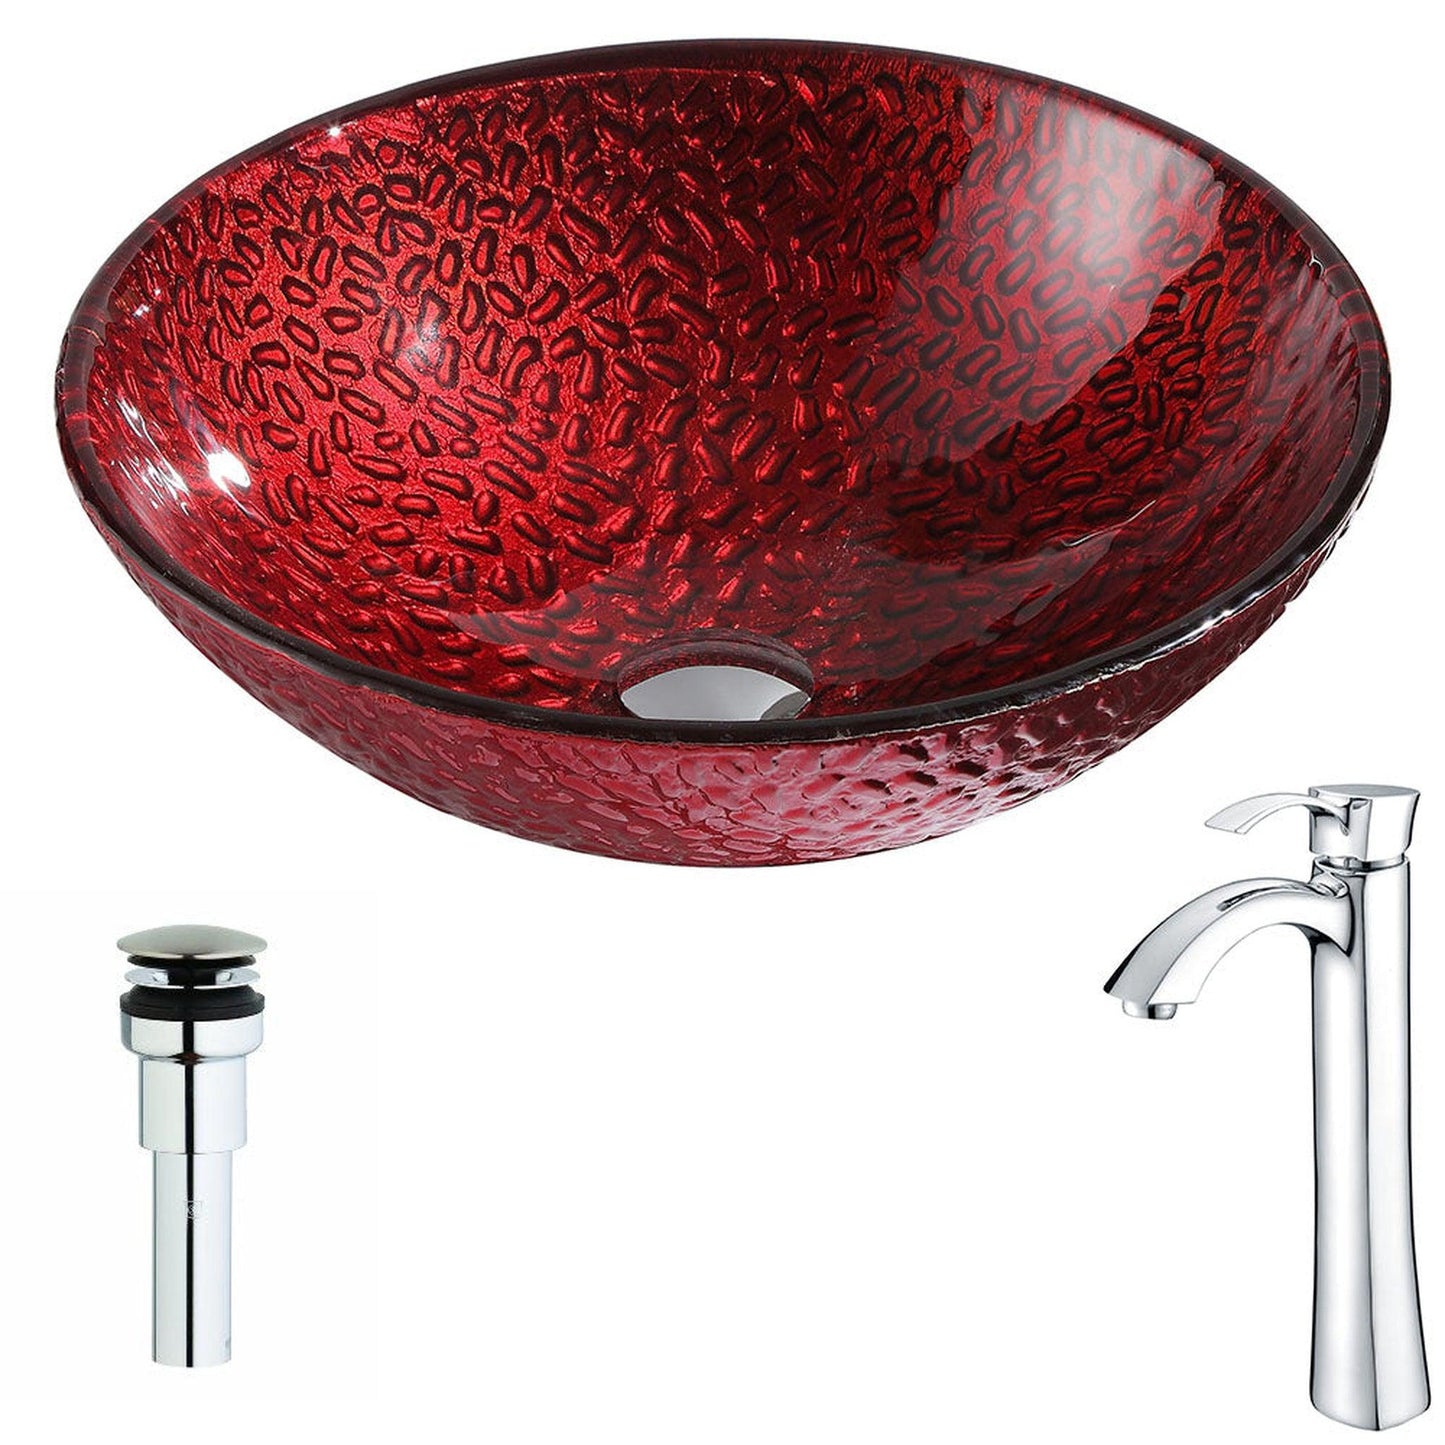 ANZZI Rhythm Series 17" x 17" Round Lustrous Red Deco-Glass Vessel Sink With Polished Chrome Pop-Up Drain and Key Faucet